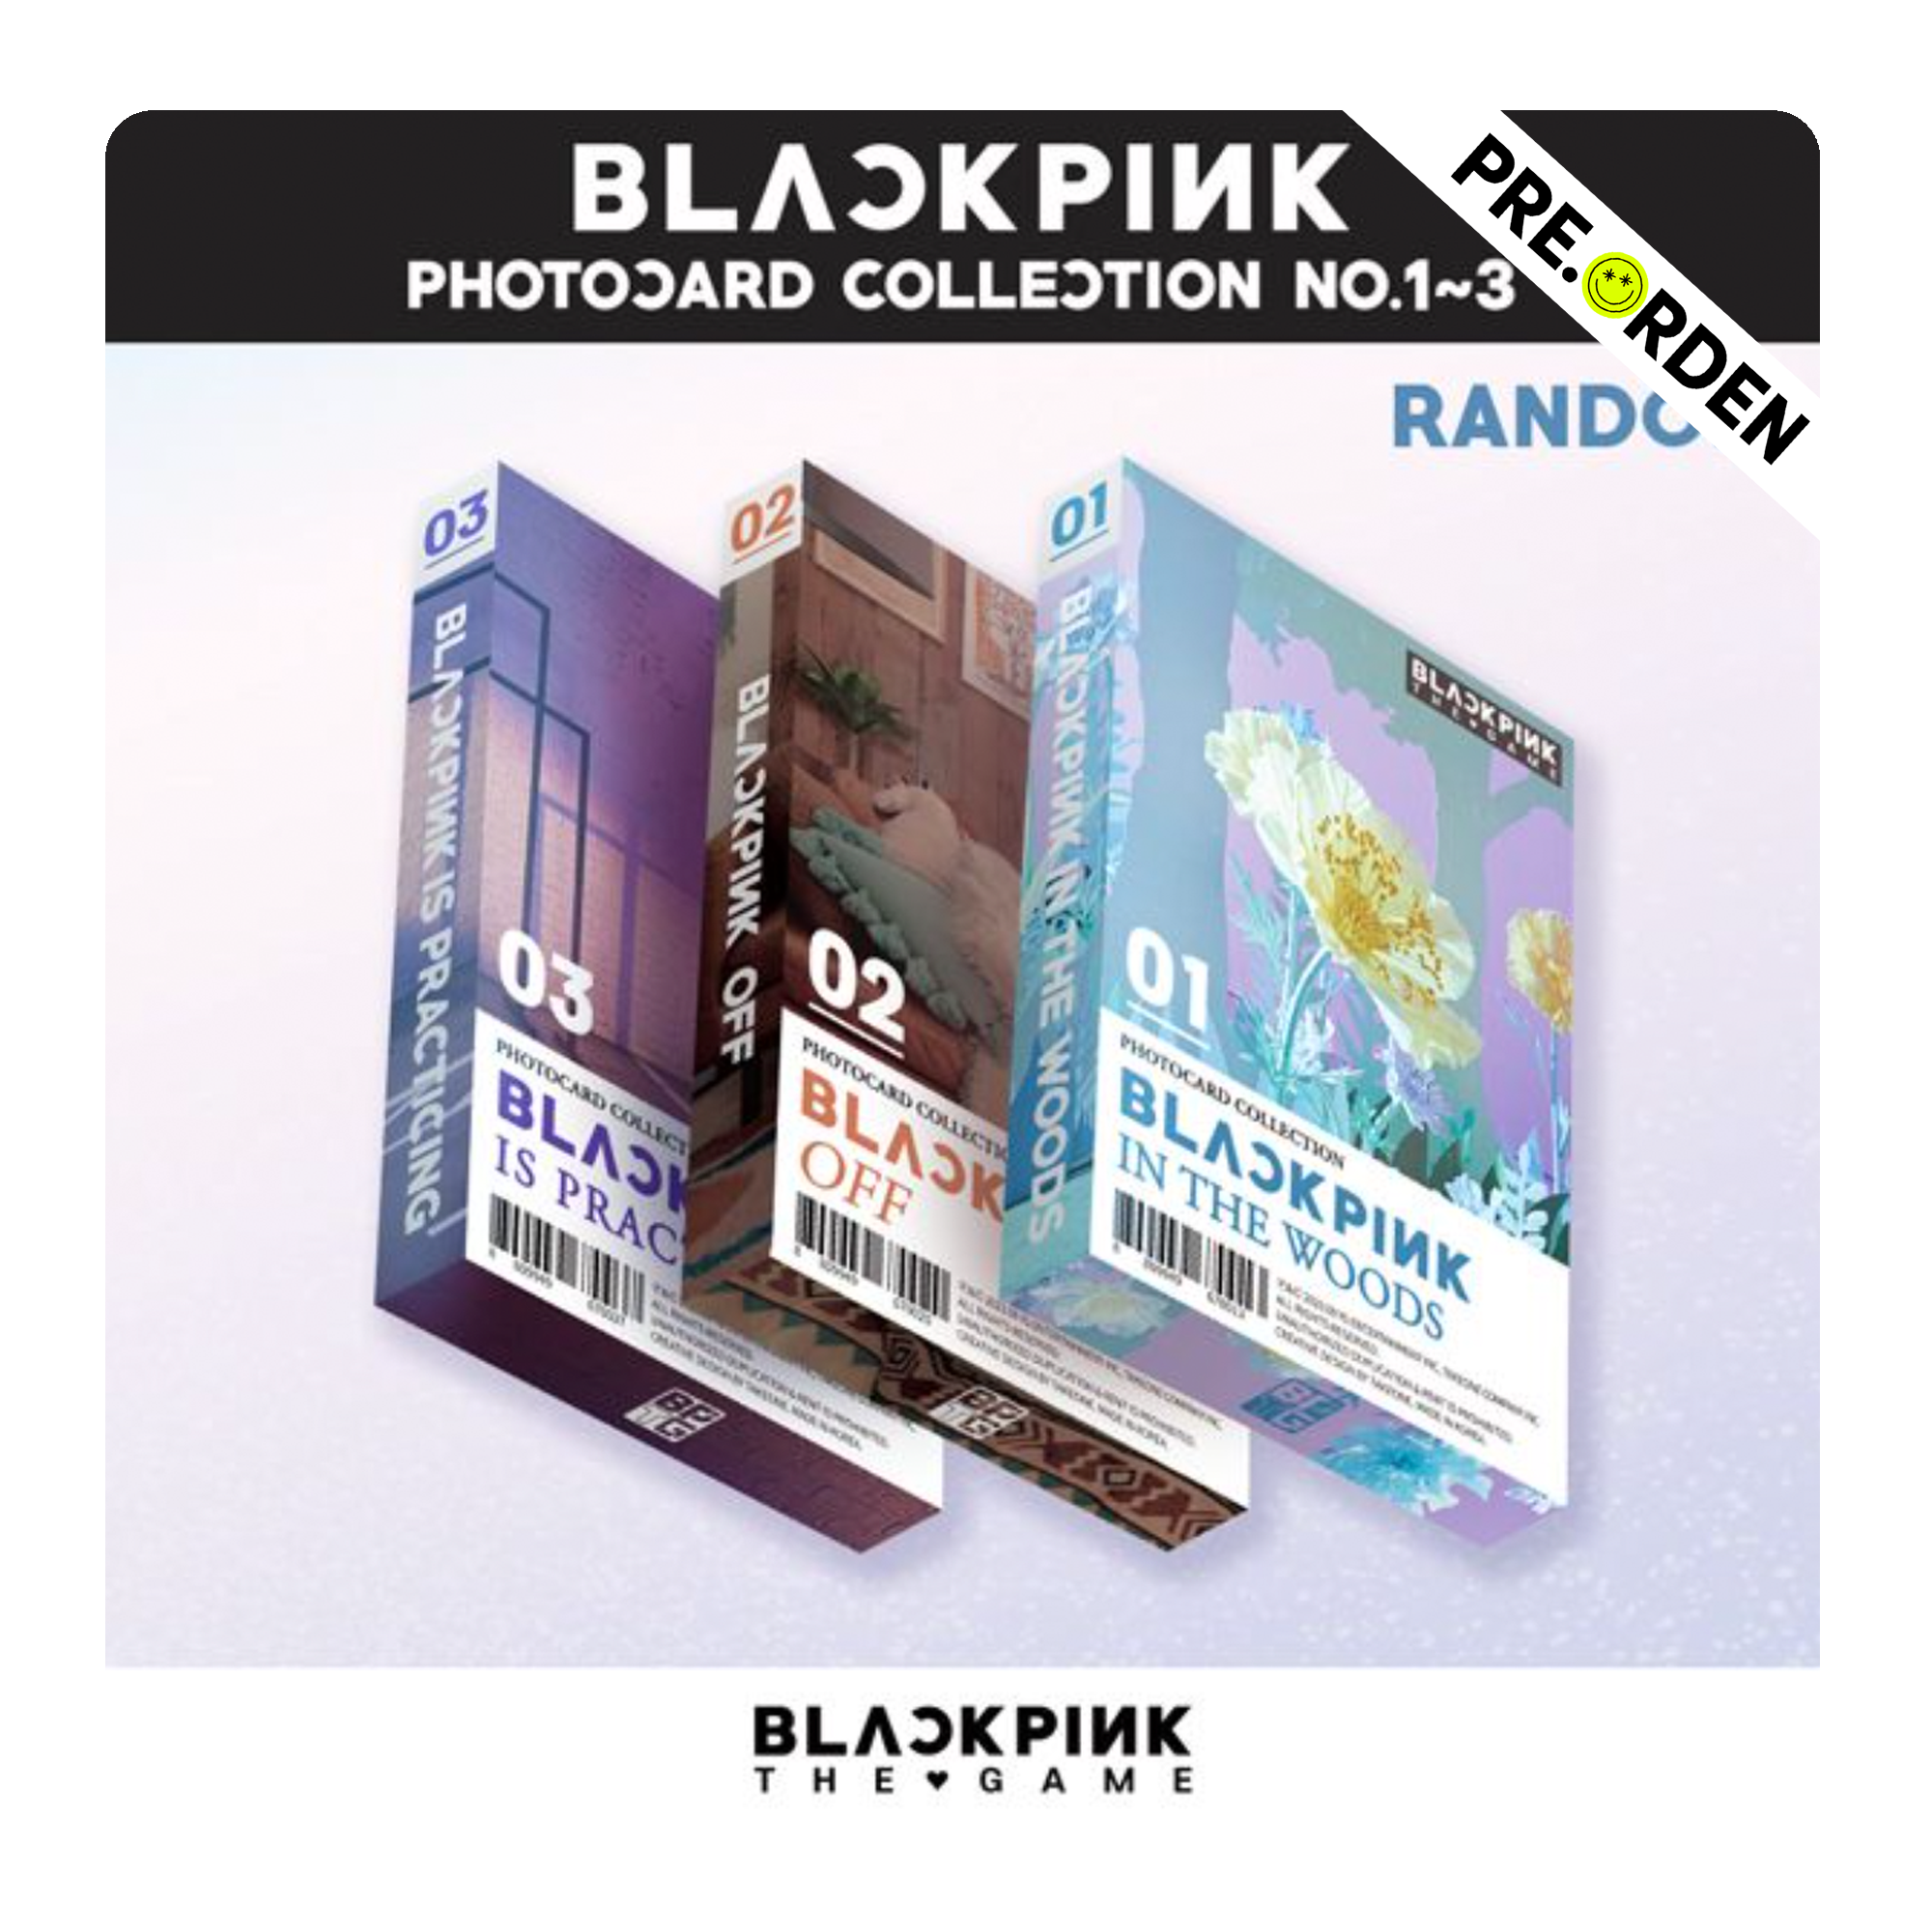 BLACKPINK - The Game Photocard Collection No.1~3